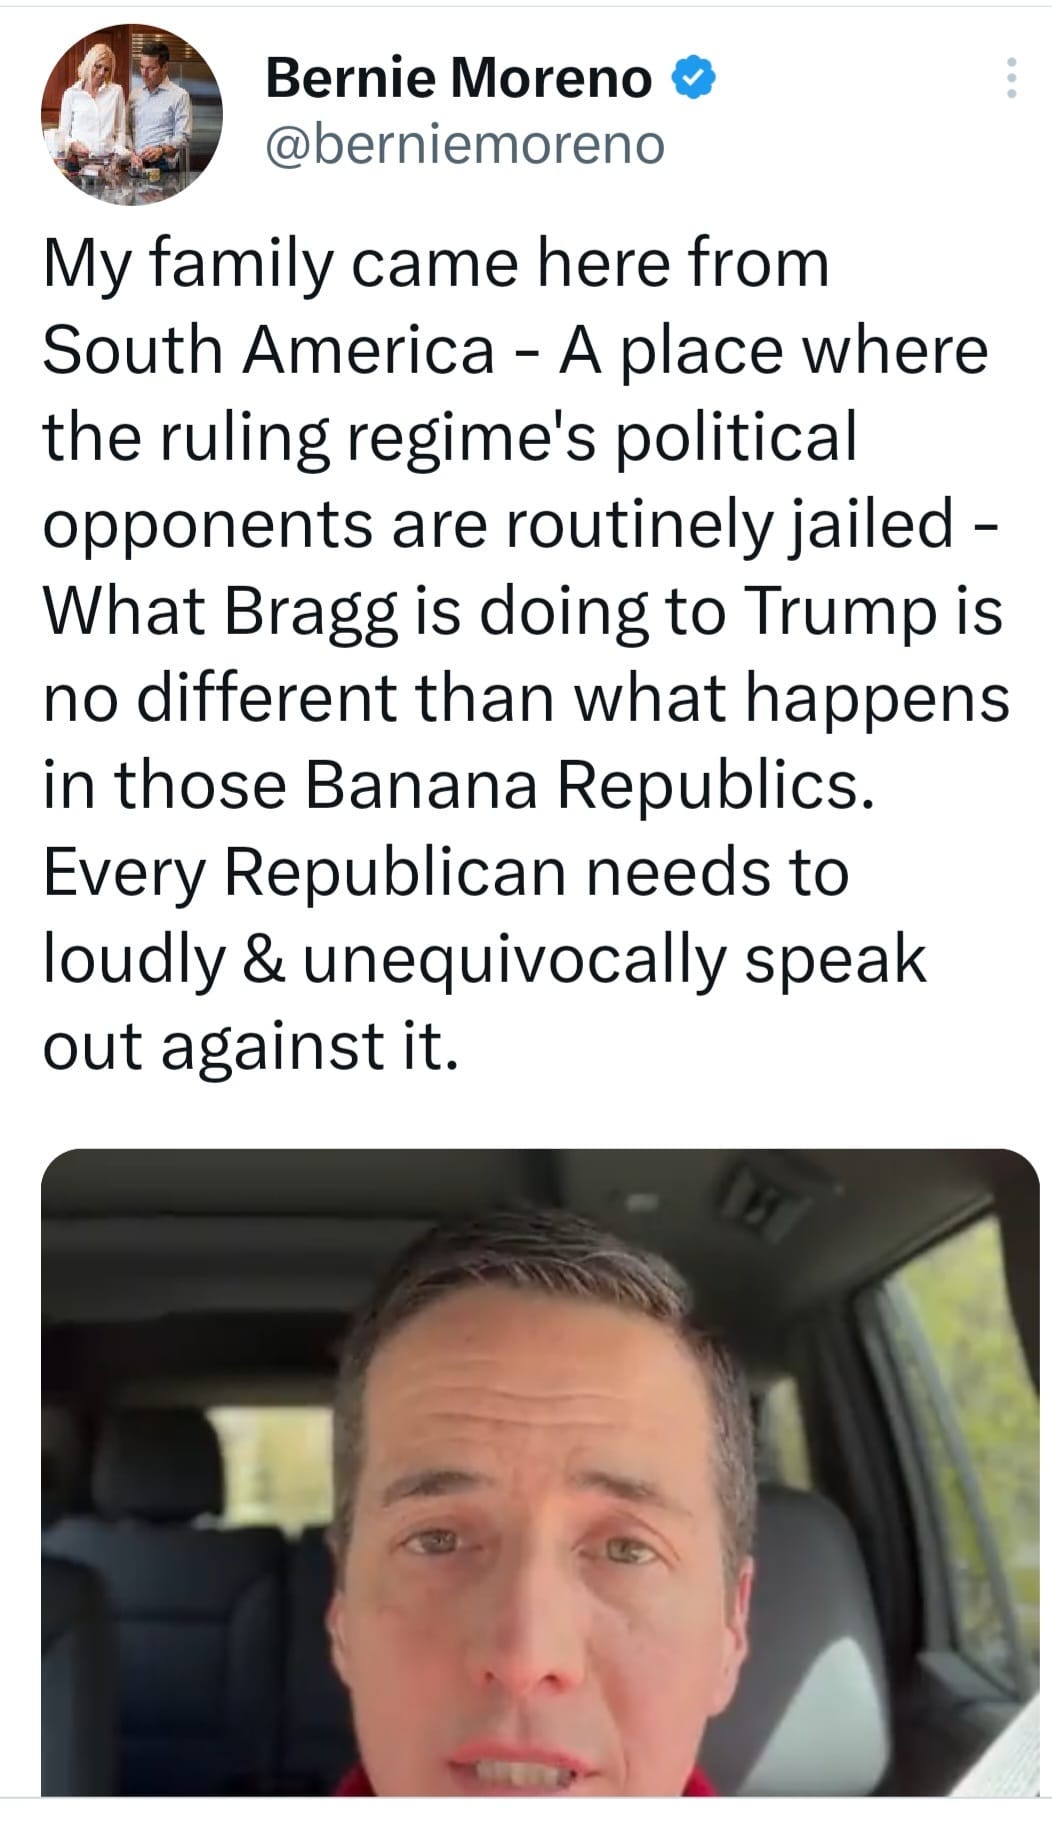 May be a Twitter screenshot of 2 people and text that says 'Bernie Moreno @berniemoreno My family came here from South America A place where the ruling regime's political opponents are routinely jailed- What Bragg is doing to Trump is no different than what happens in those Banana Republics. Every Republican needs to loudly & unequivocally speak out against it.'